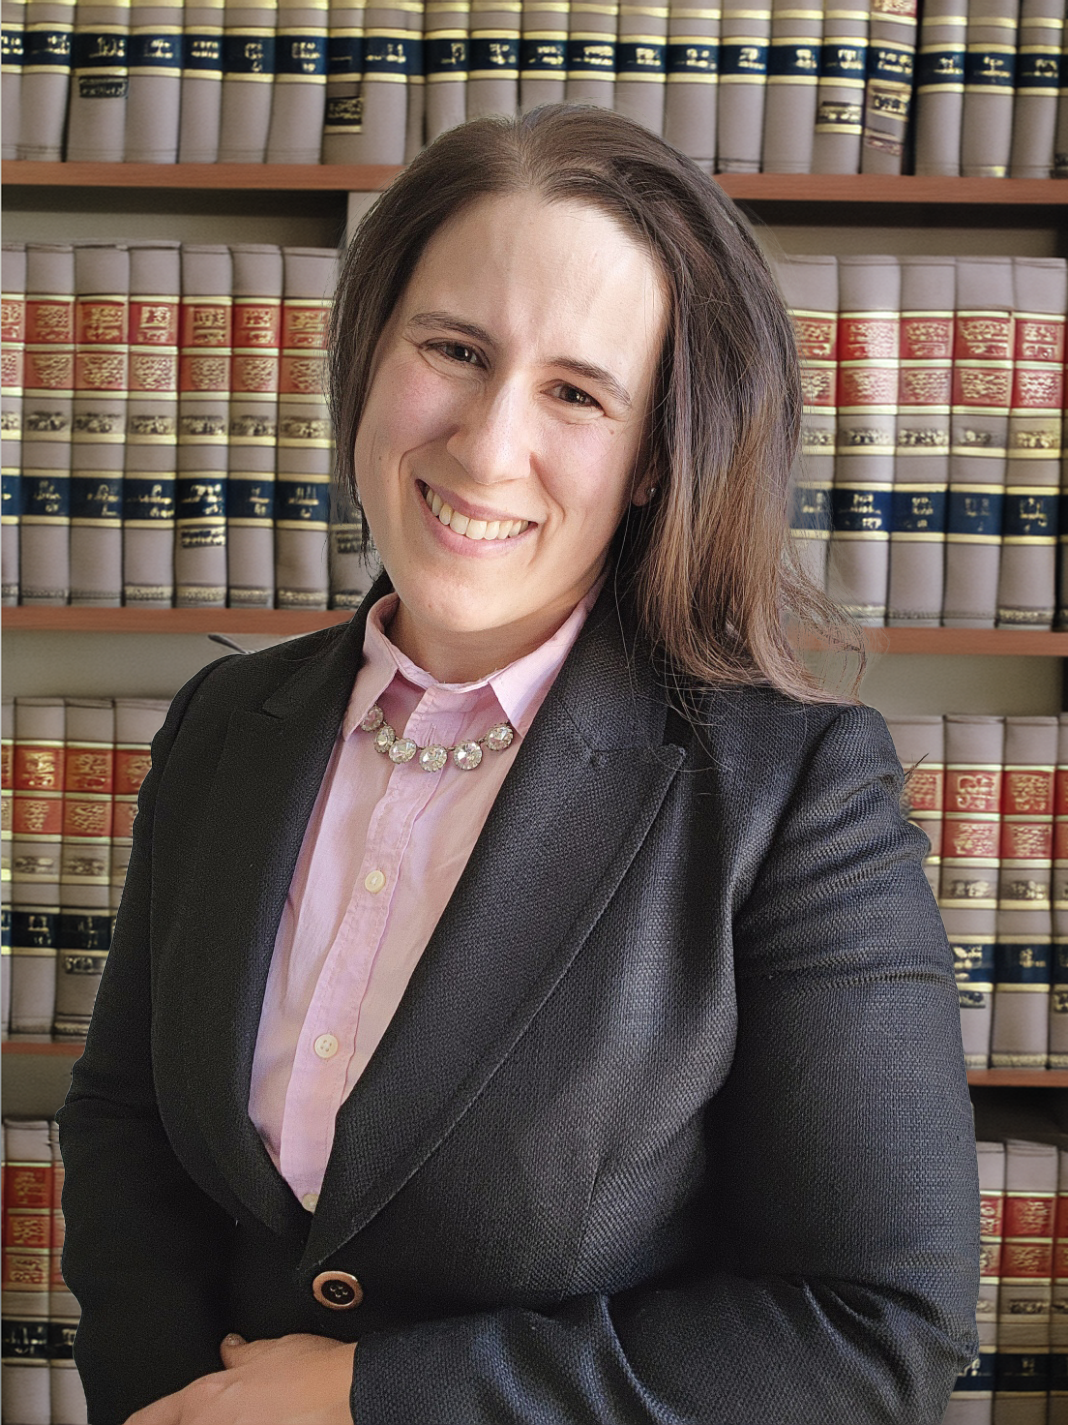 photo of a professional woman with law books behind her